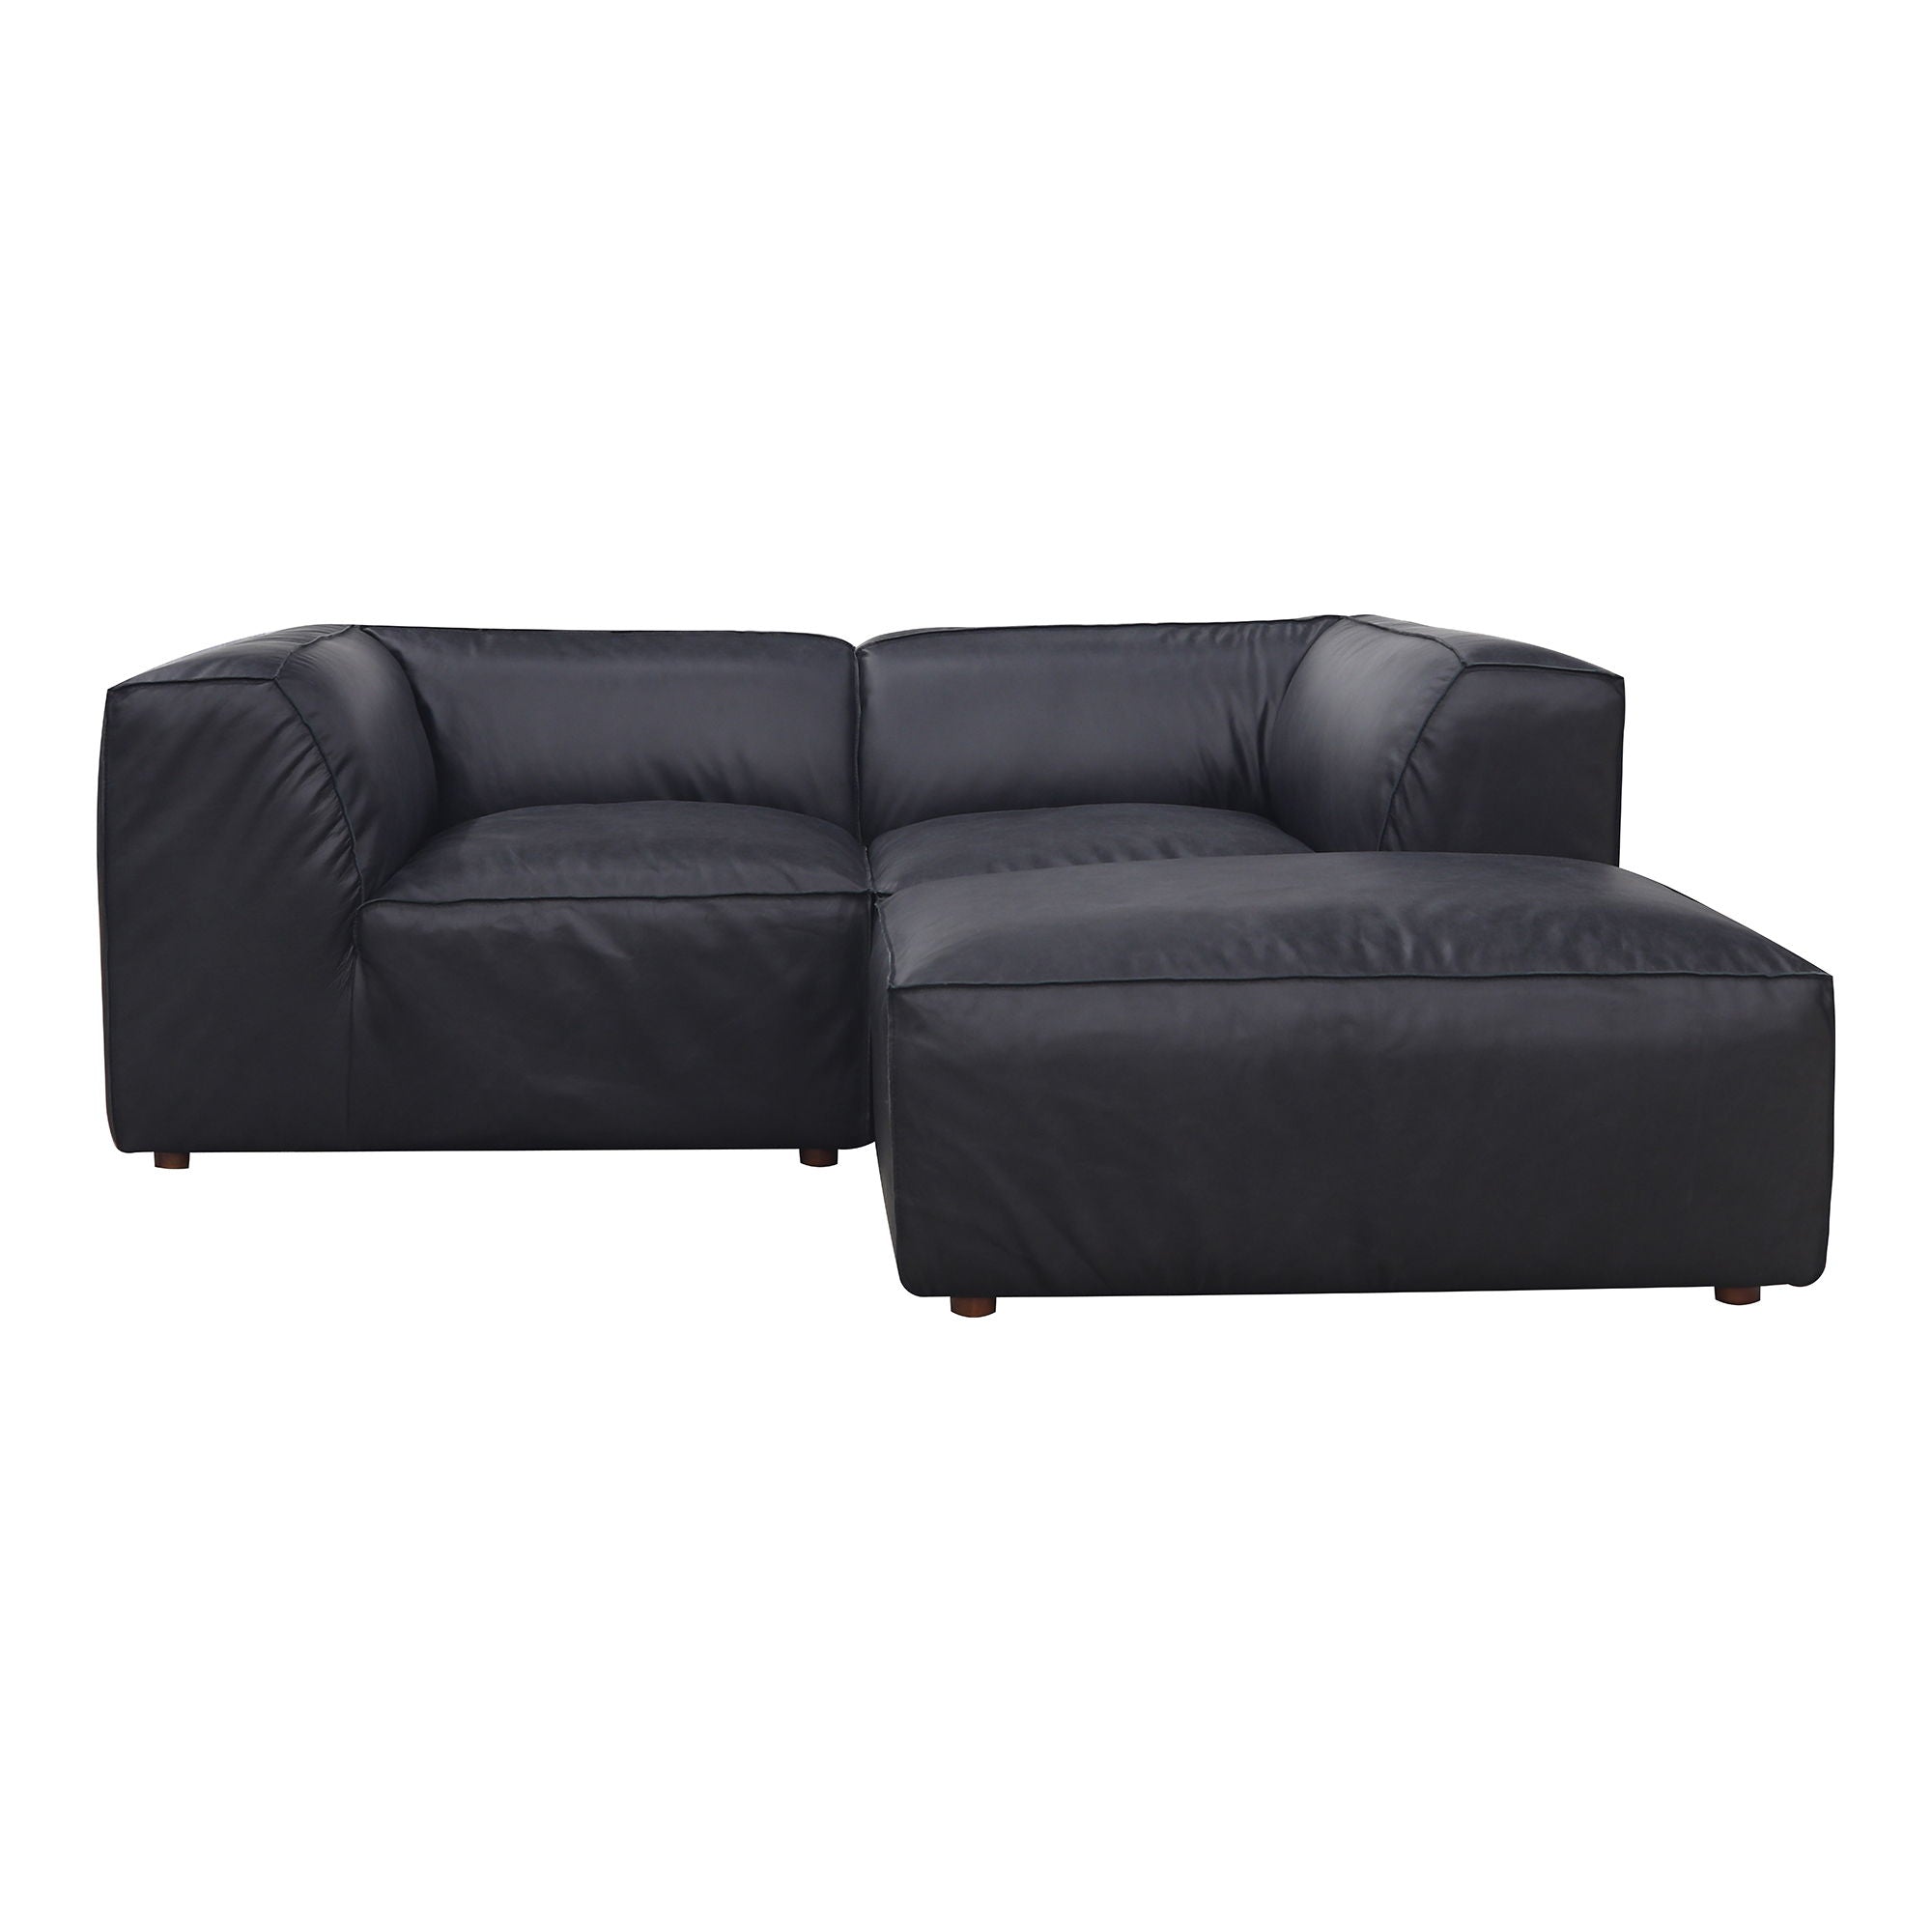 3-Piece Leather Modular Sectional - Form Nook, Black